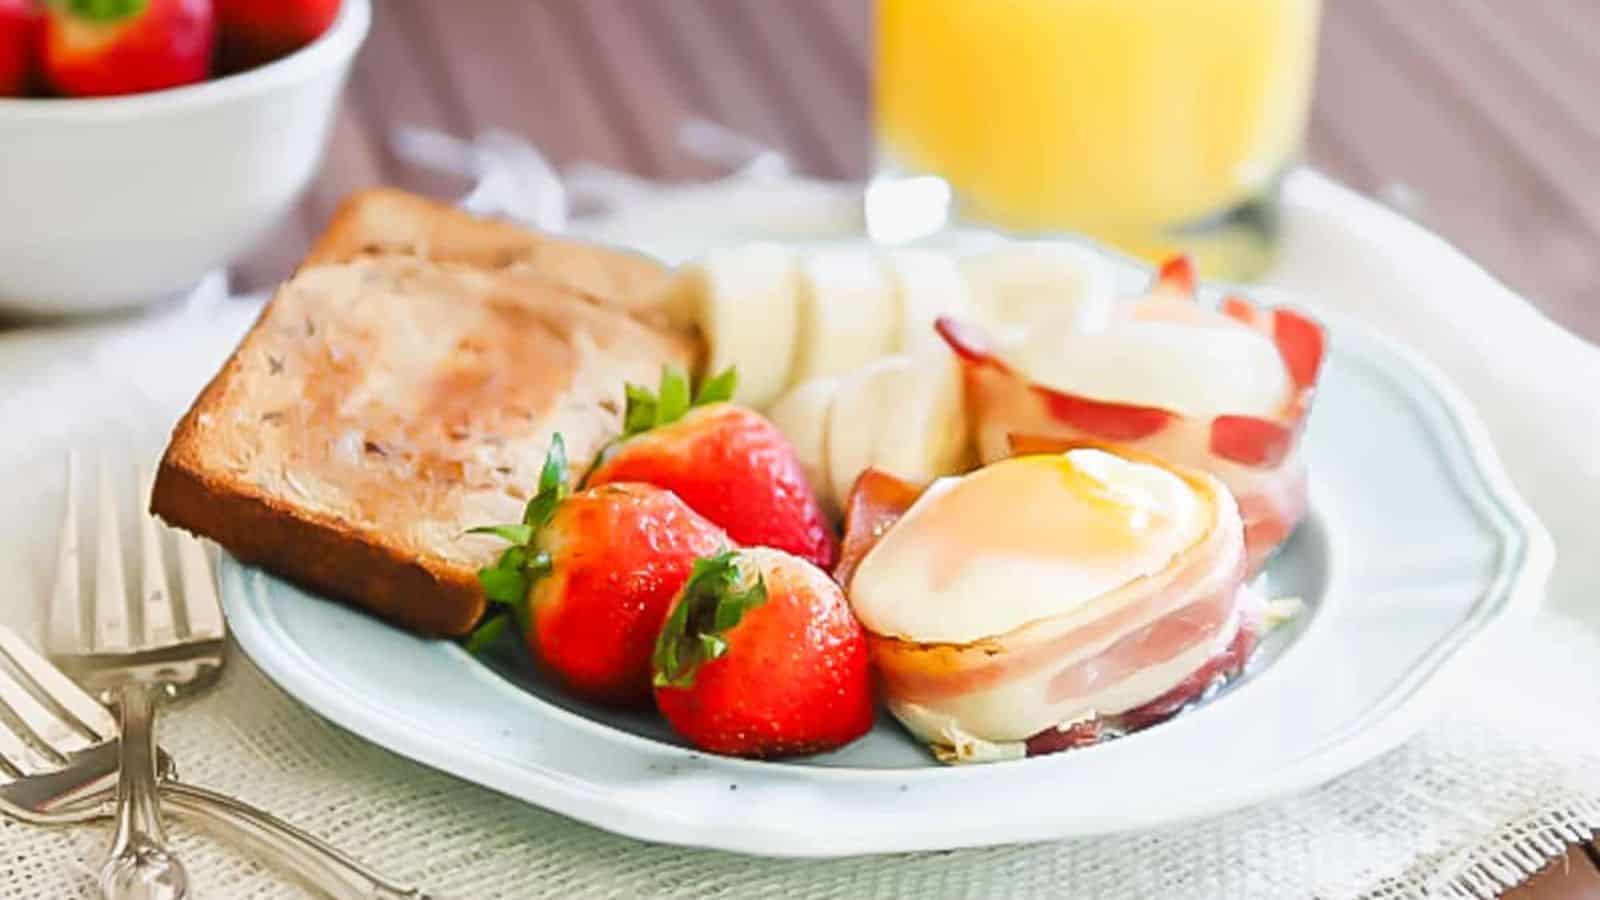 Bacon wrapped egg cups on a plate with toast and strawberries.